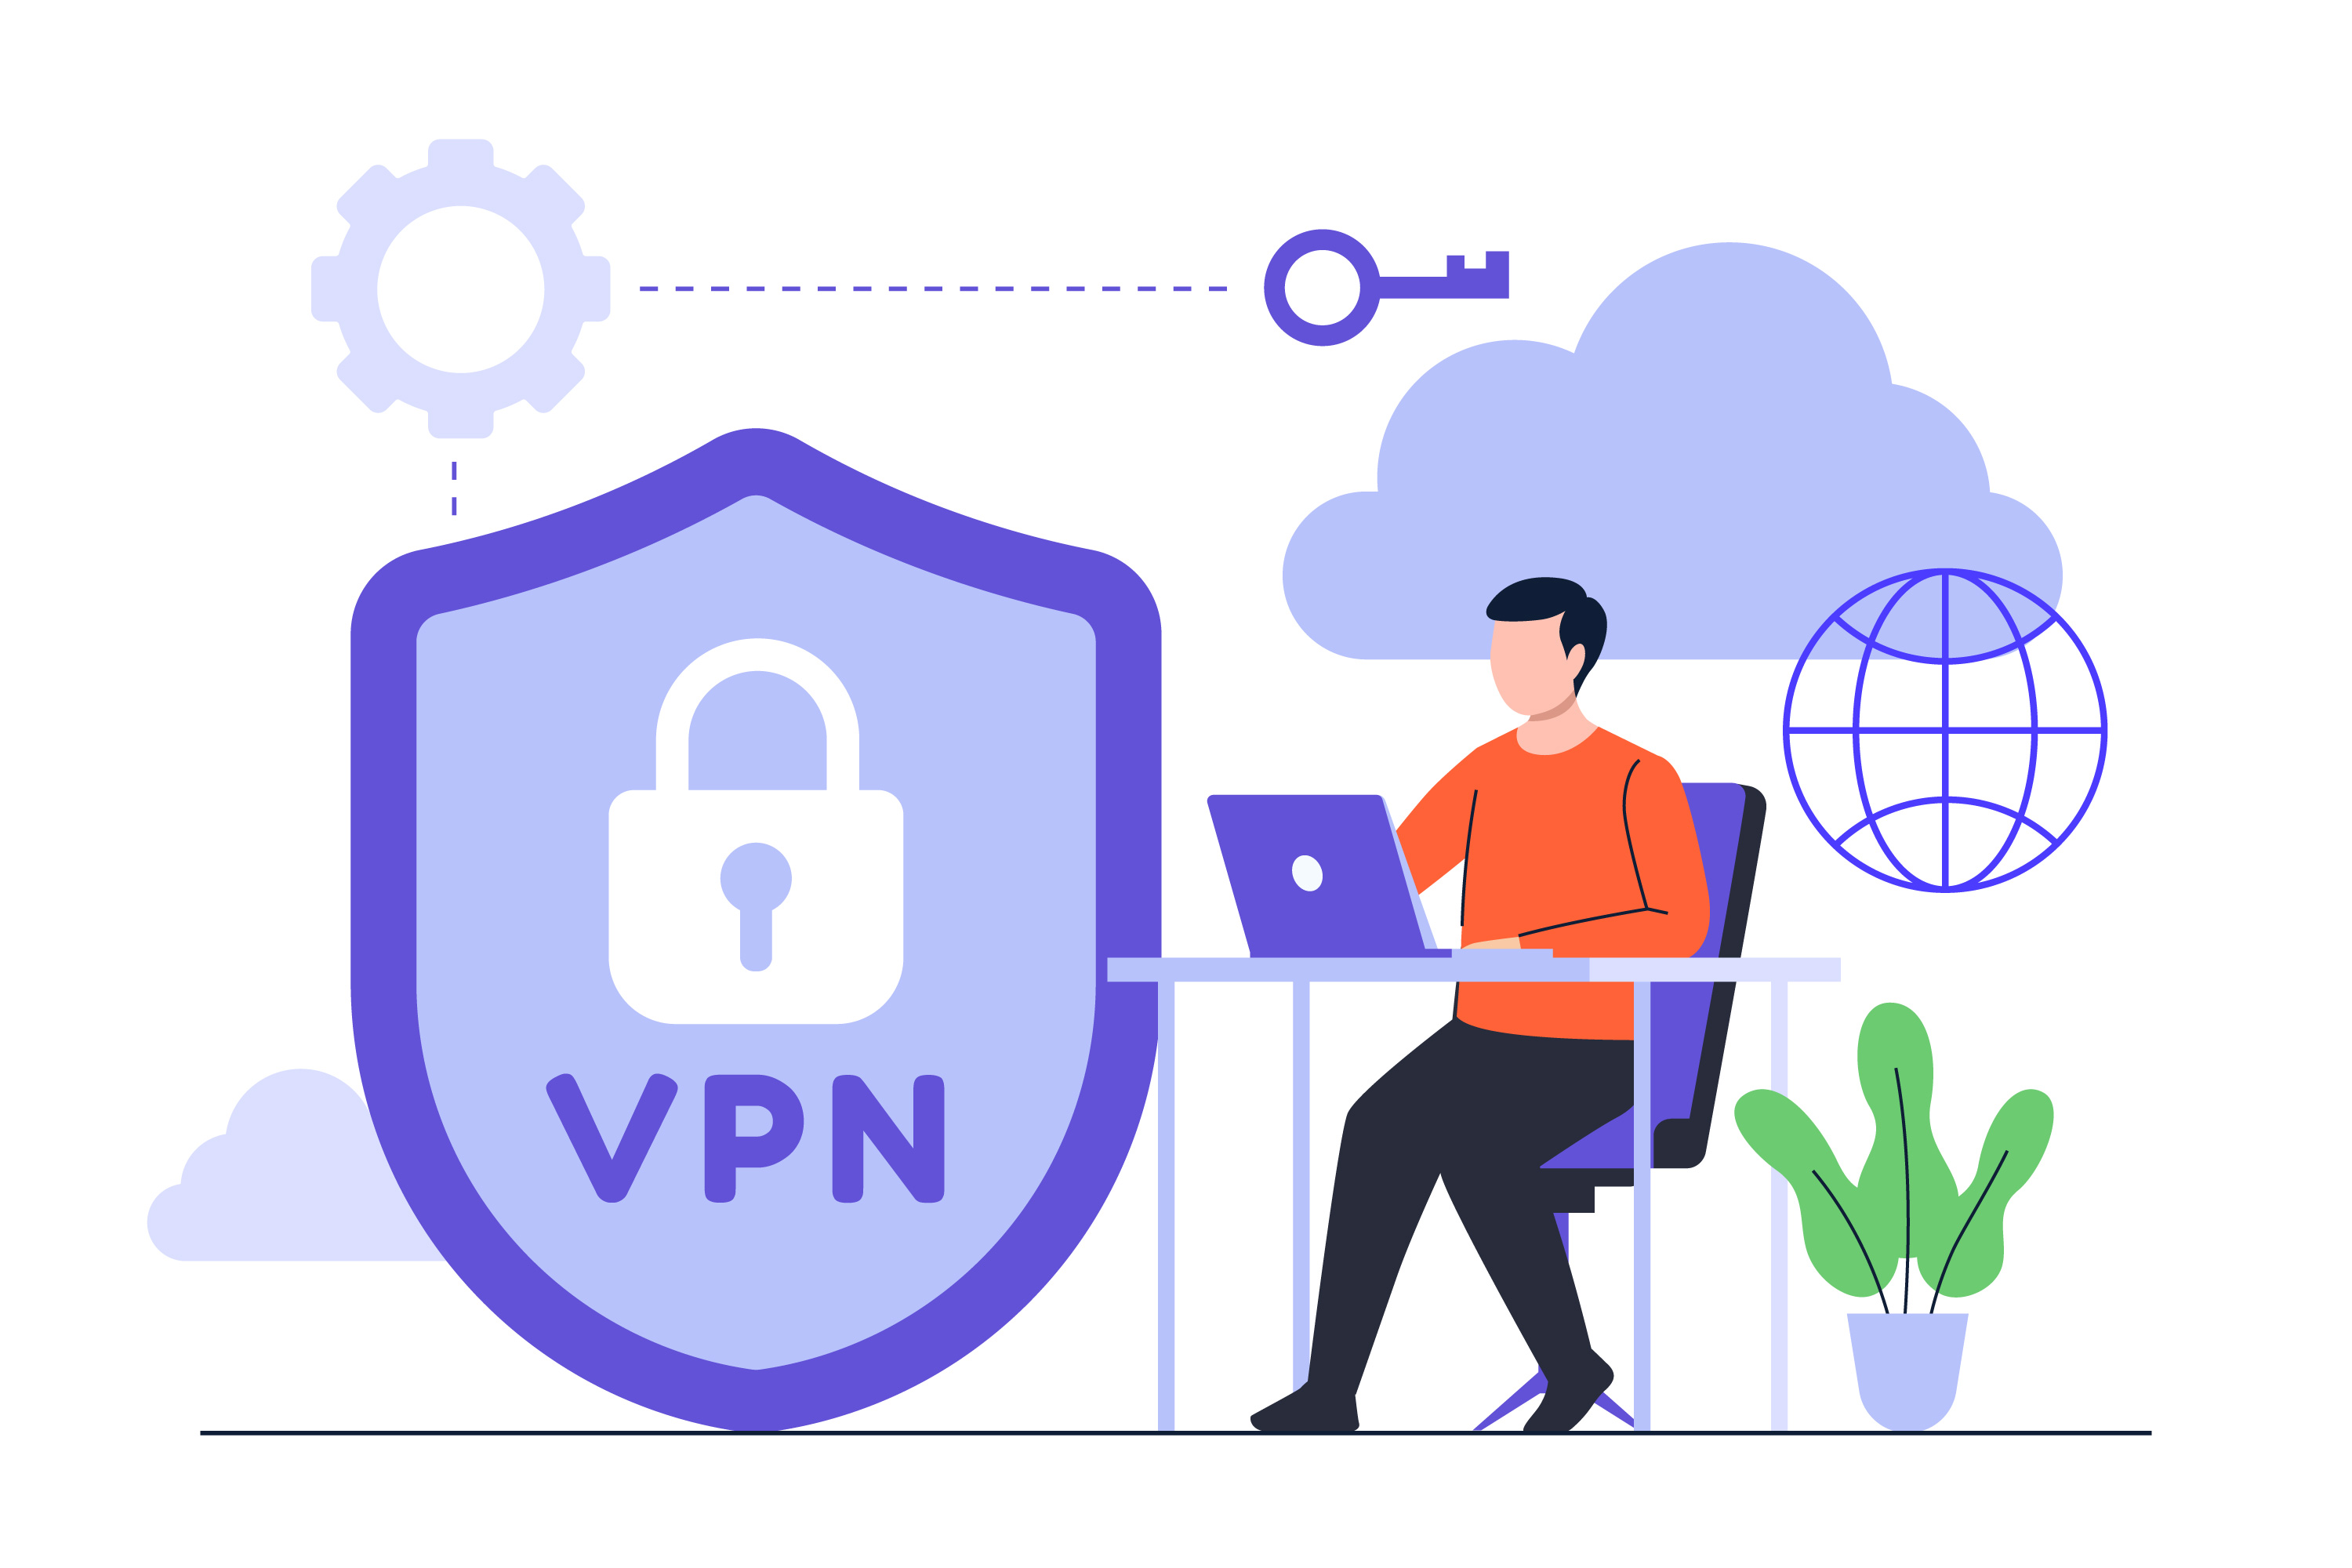 Nominees: The VPN for Companies